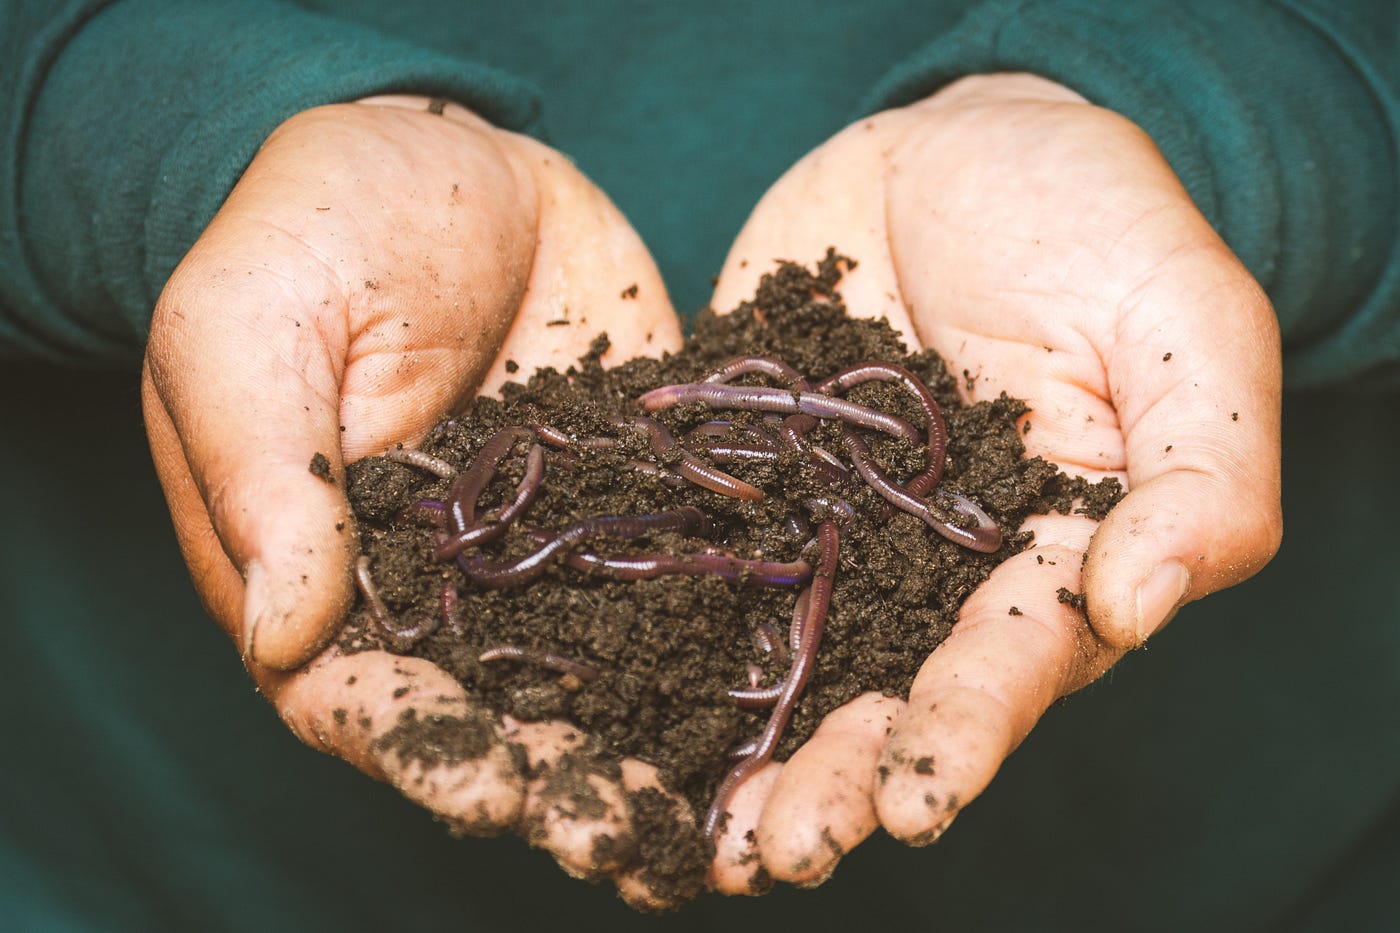 How To Make Money With Worms. You read that headline right and yes